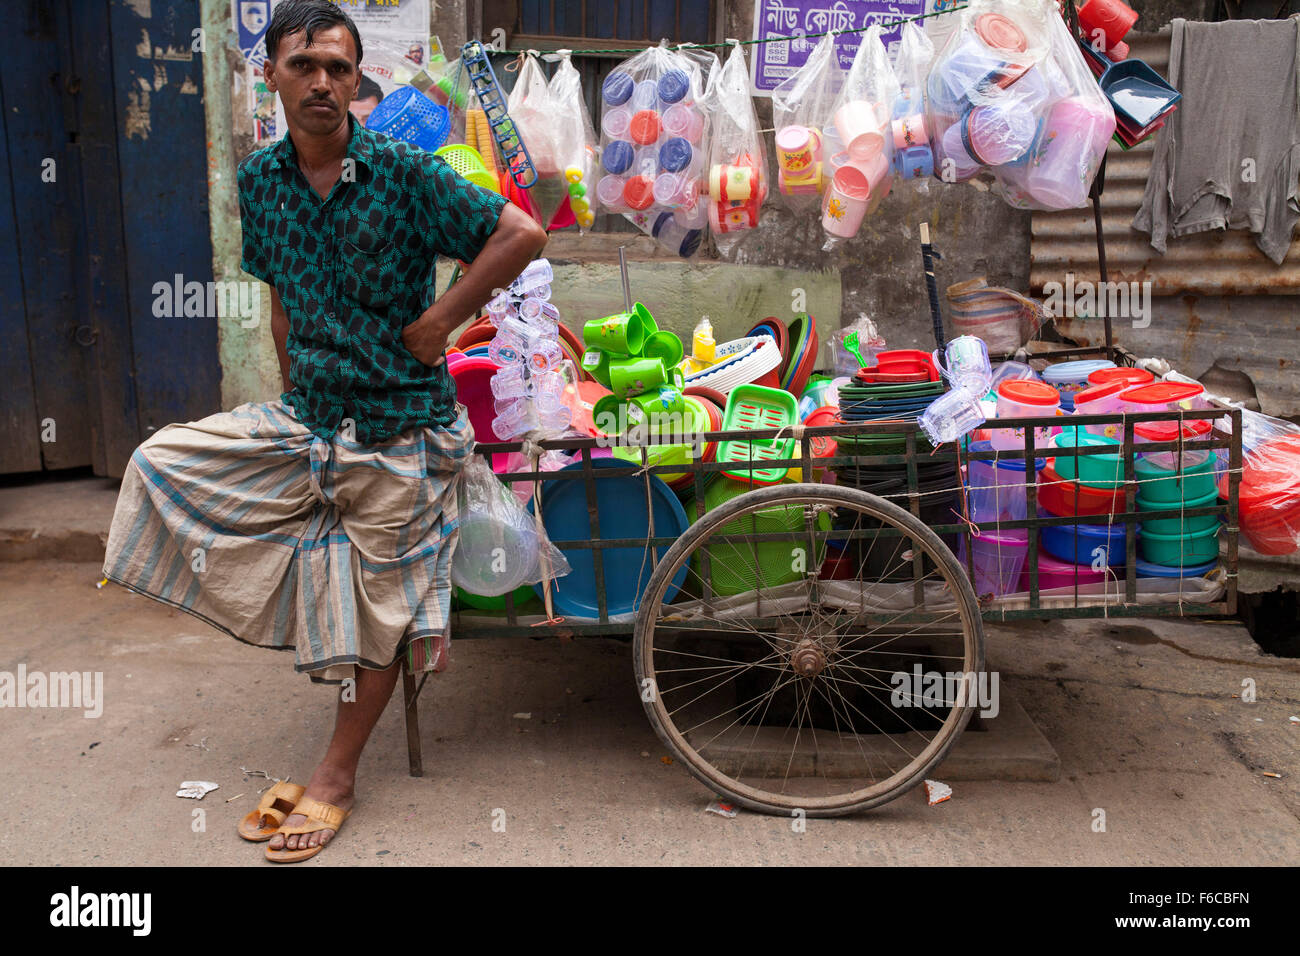 Dhaka, Bangladesh. 15th November, 2015. A street hawker standing with his stall beside street in Old  Dhaka on November 15, 2015. Old Dhaka is a term used to refer to the historic old city of Dhaka, the capital of modern Bangladesh. It was founded in 1608 as Jahangir Nagar, the capital of Mughal Bengal. Credit:  zakir hossain chowdhury zakir/Alamy Live News Stock Photo